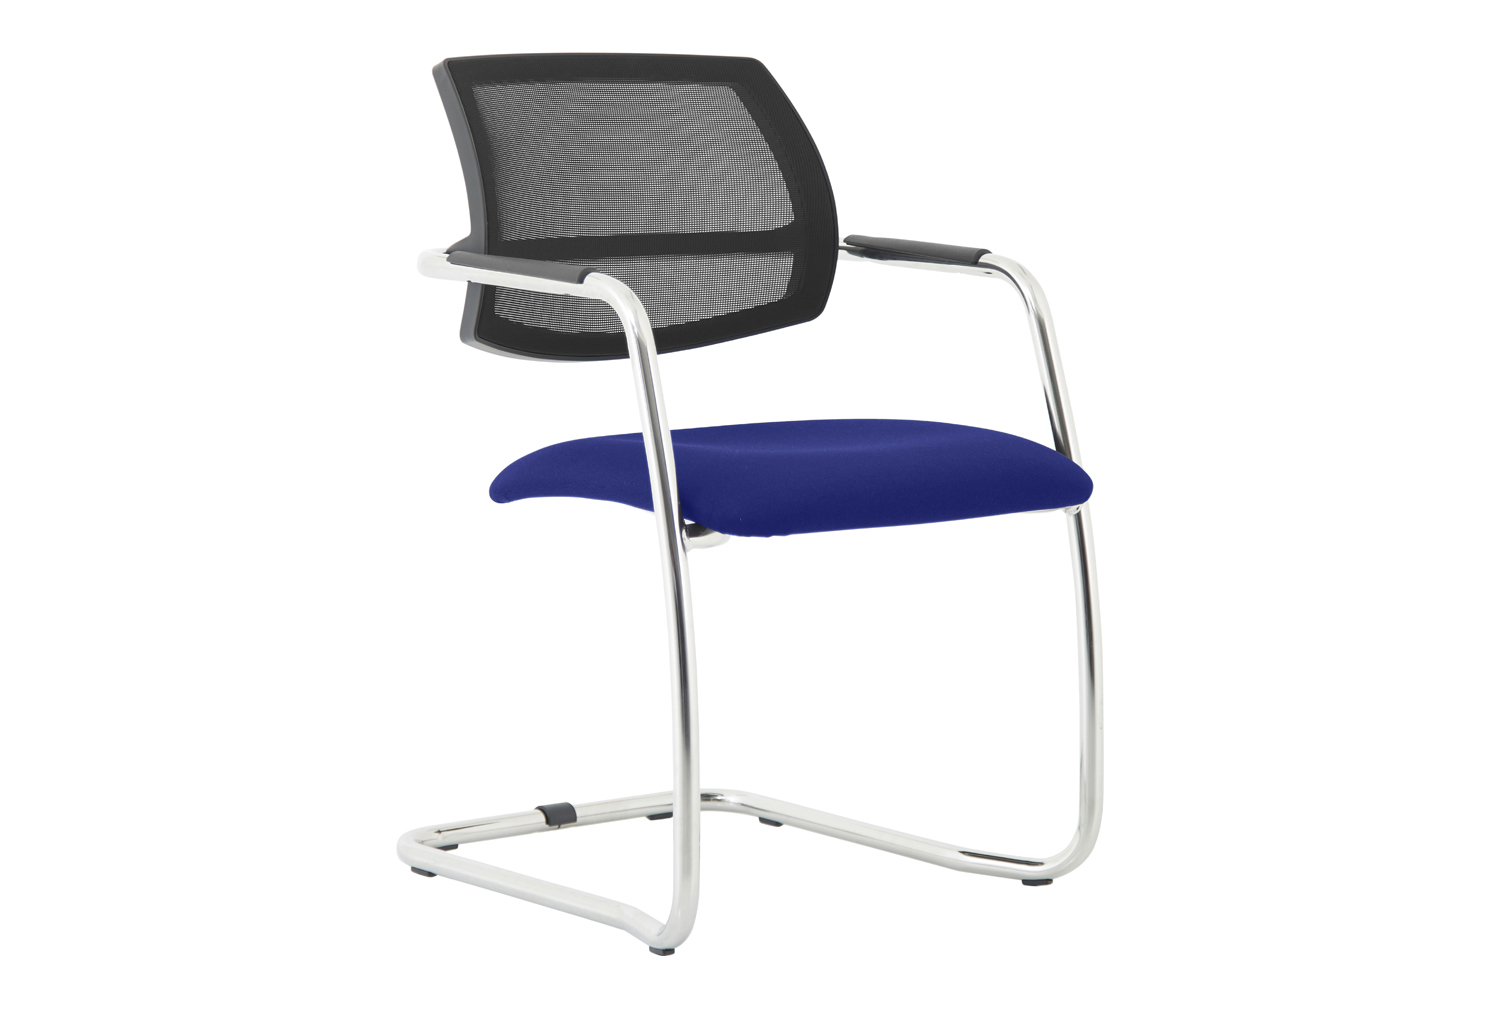 Asura Mesh Back Stacking Cantilever Office Chair, Stevia Blue